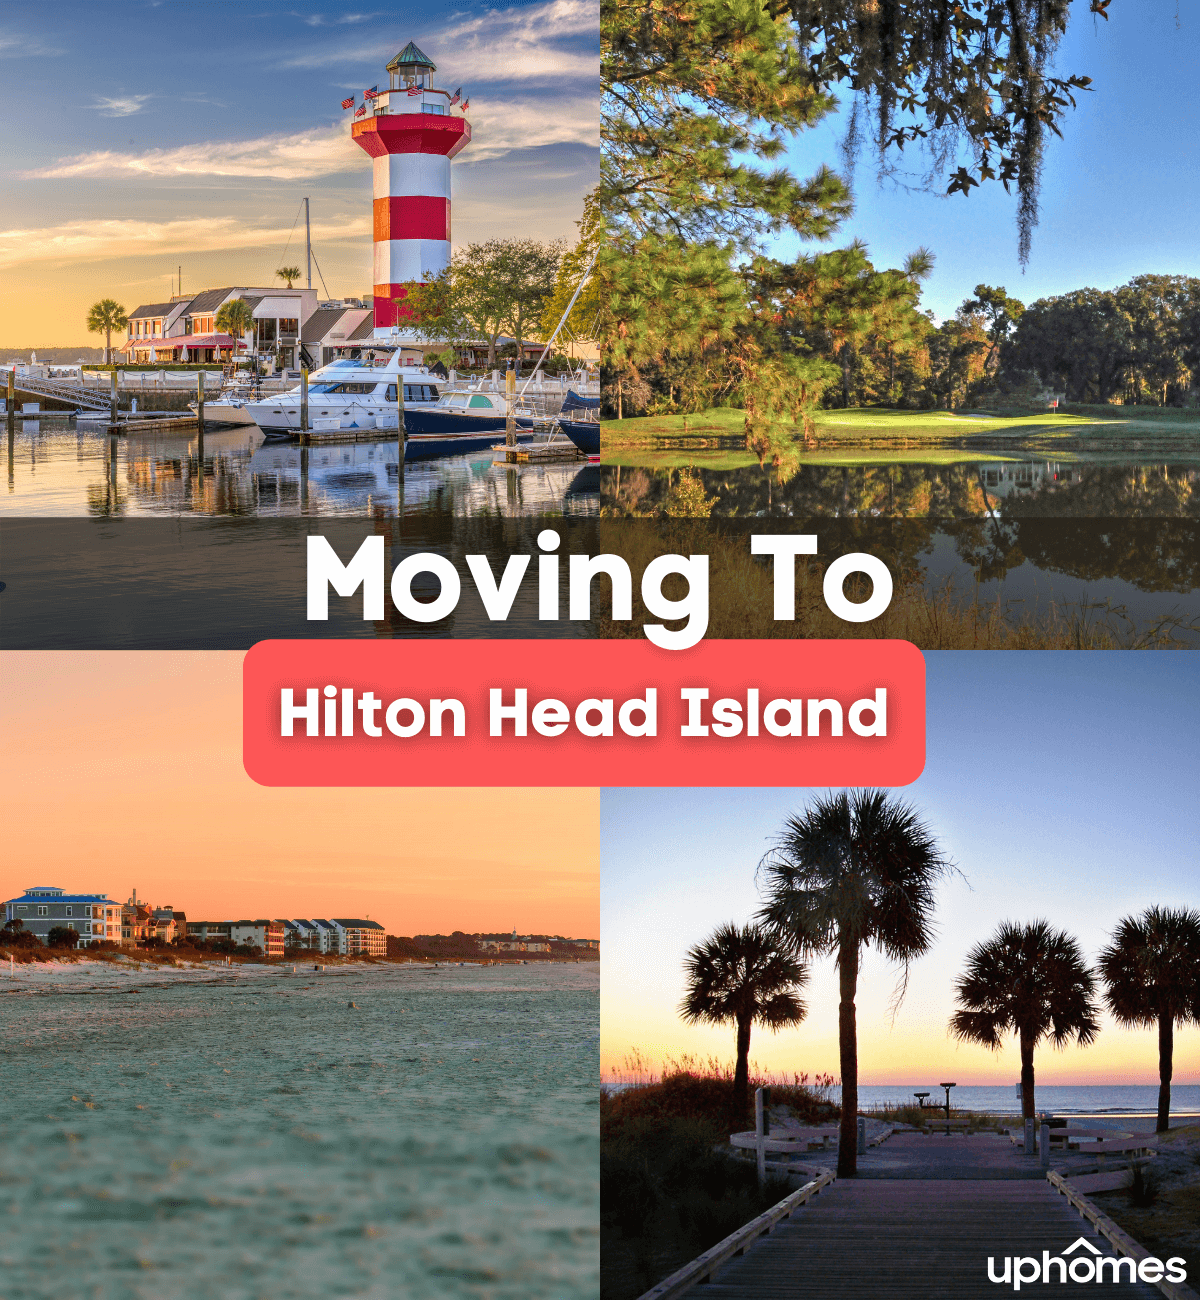 Moving to Head Hilton Island SC - What is it like Living in Hilton Head?